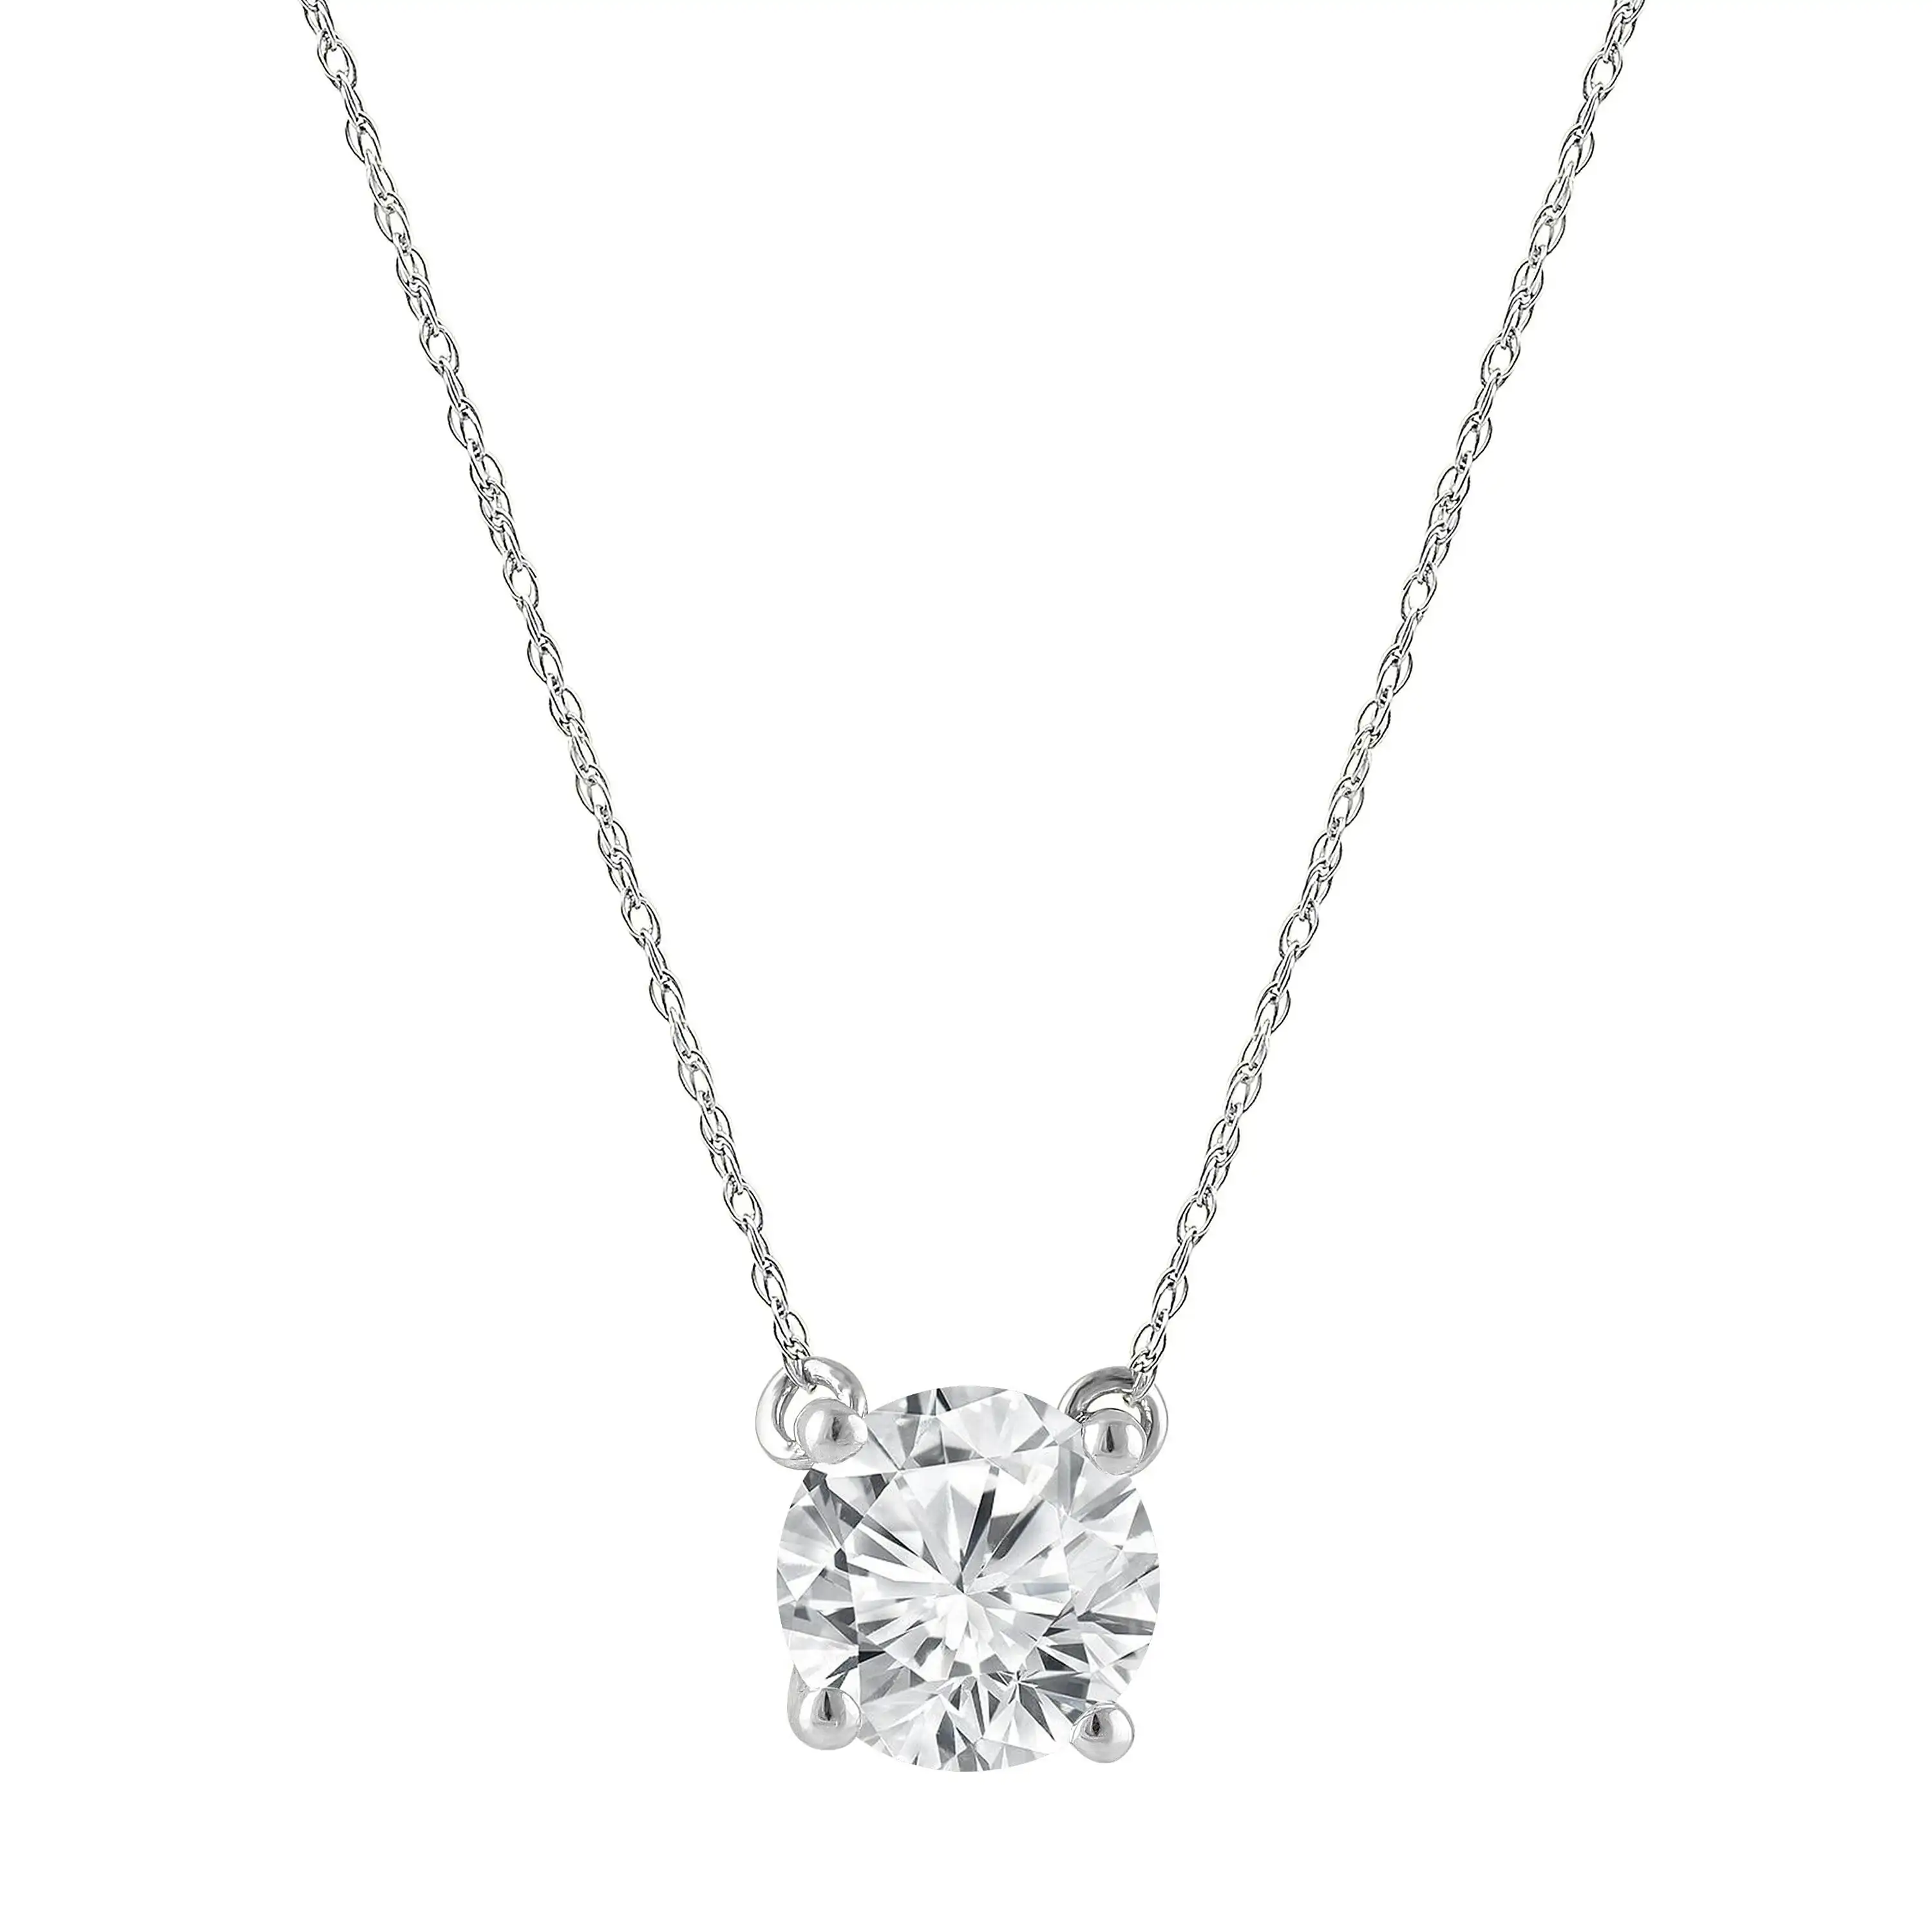 Meera 1.00ct Laboratory Grown Solitaire Diamond Necklace in 9ct White Gold